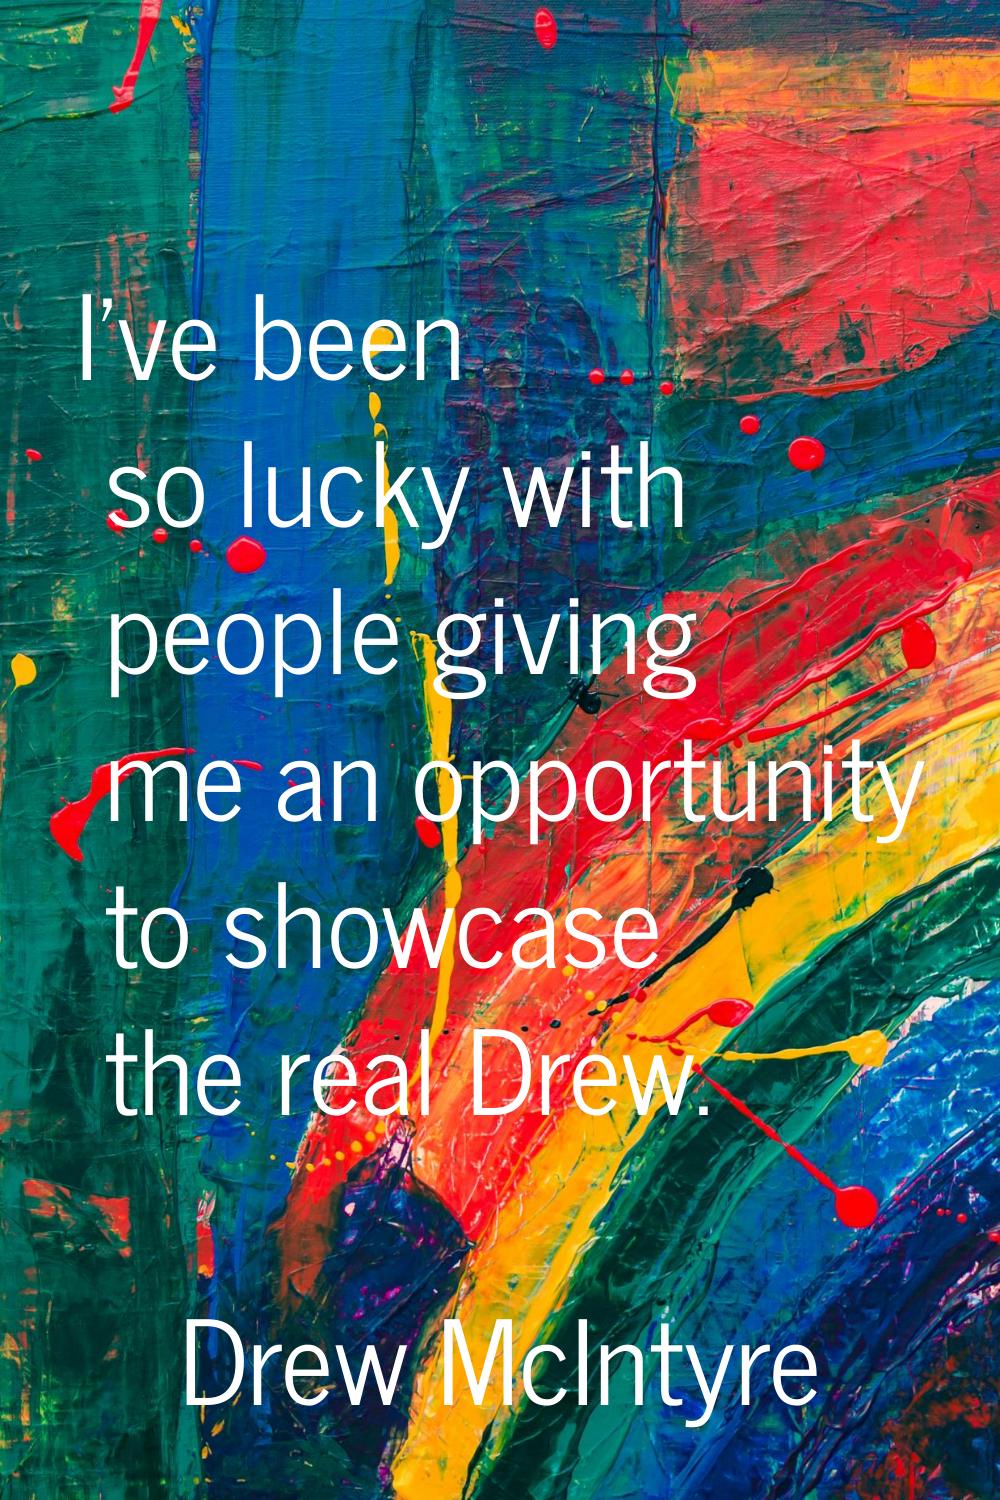 I've been so lucky with people giving me an opportunity to showcase the real Drew.